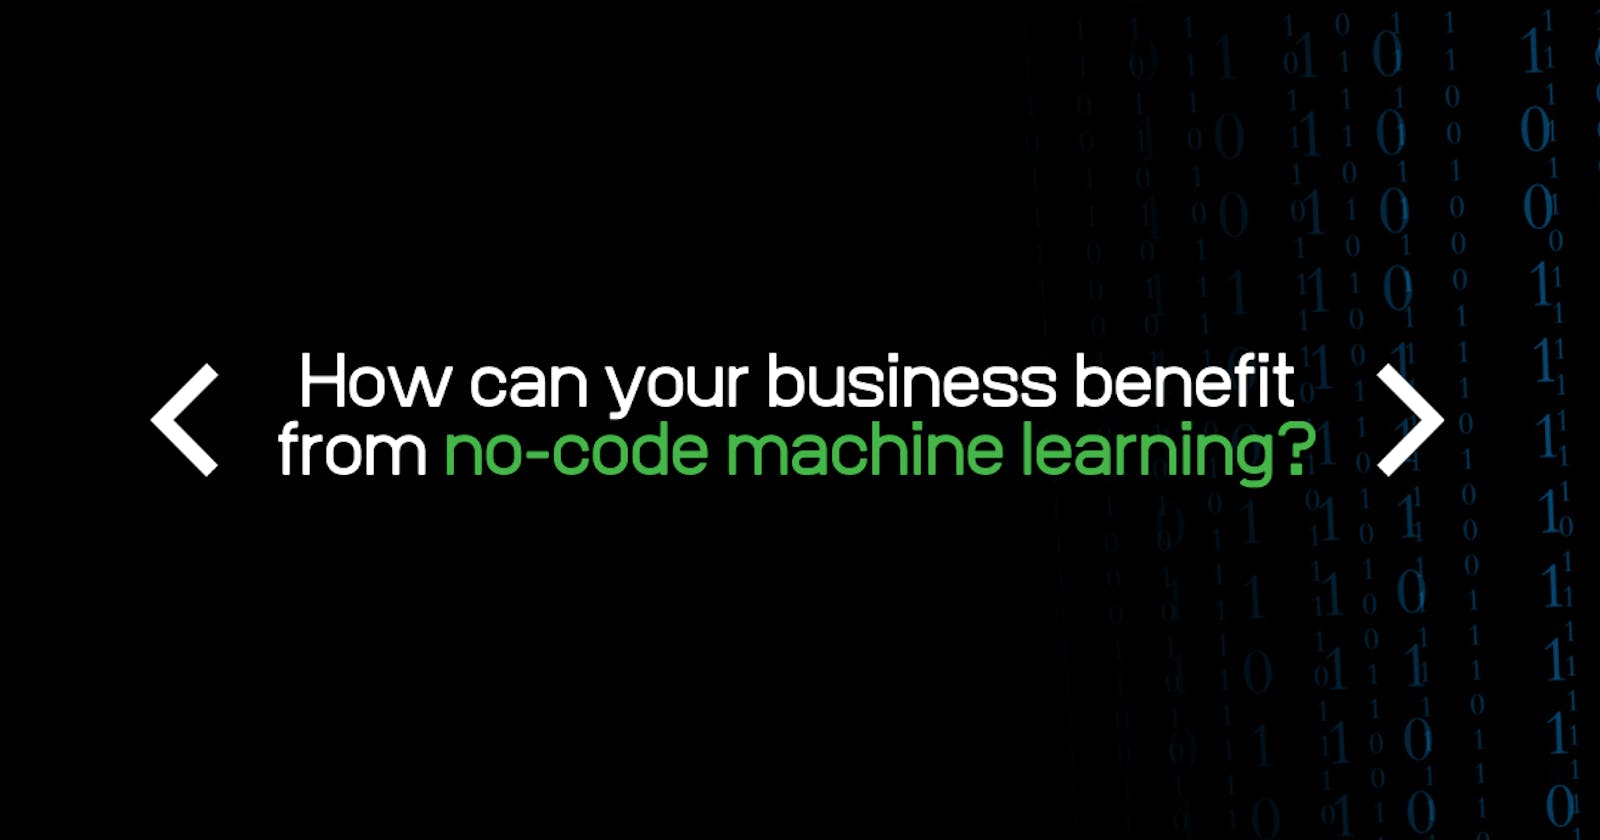 How can your business benefit from no-code machine learning?